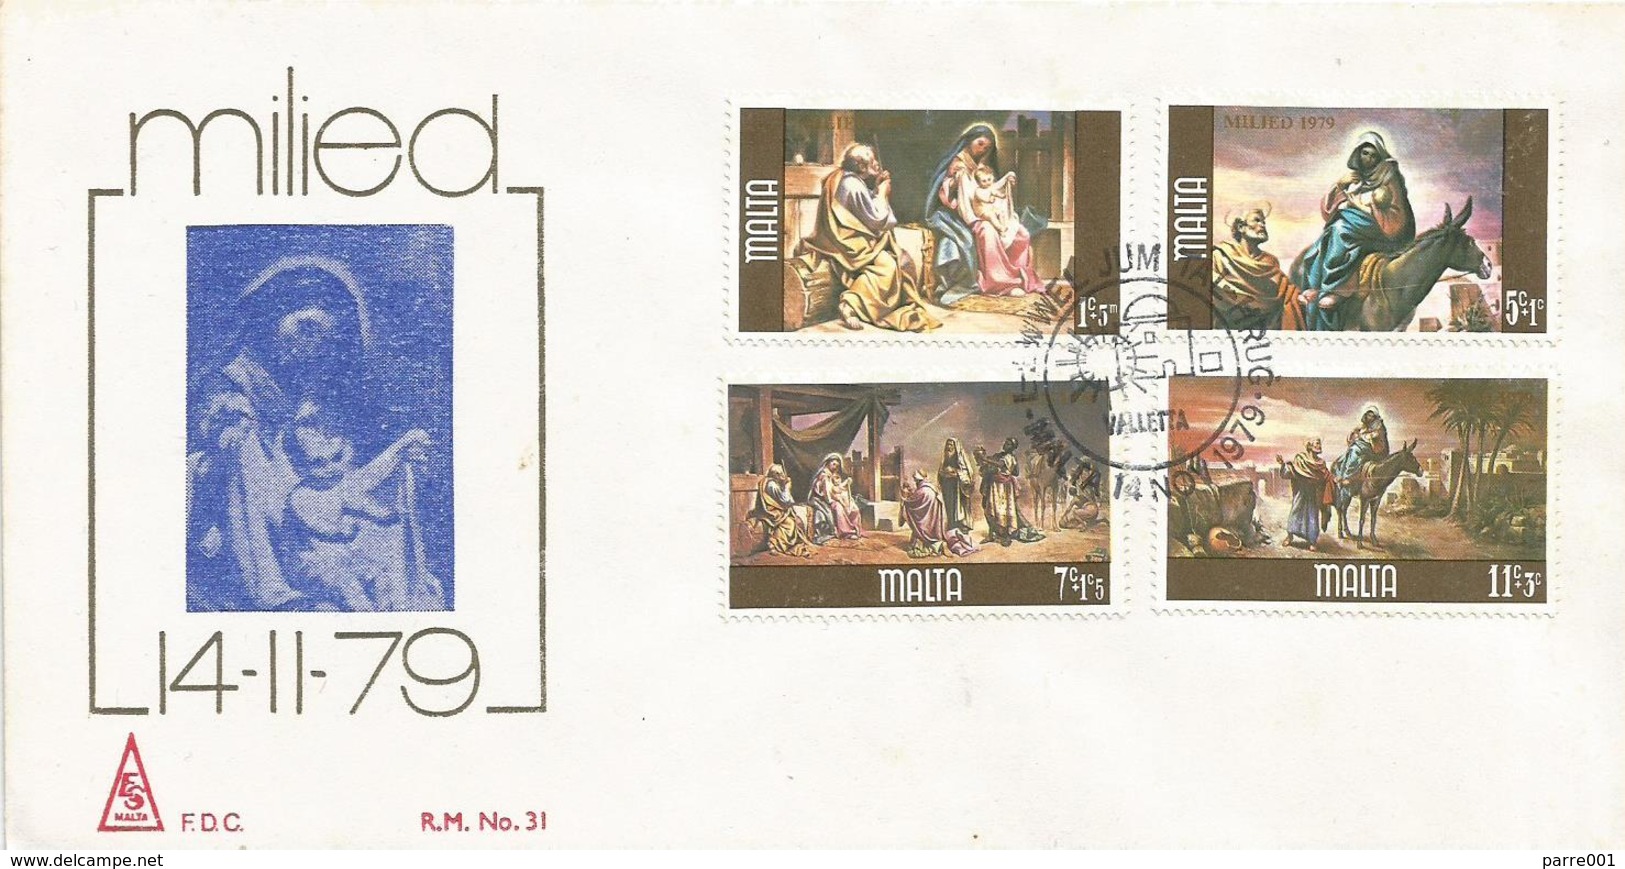 Malta 1979 Valletta Christmas Paintings FDC Cover - Paintings